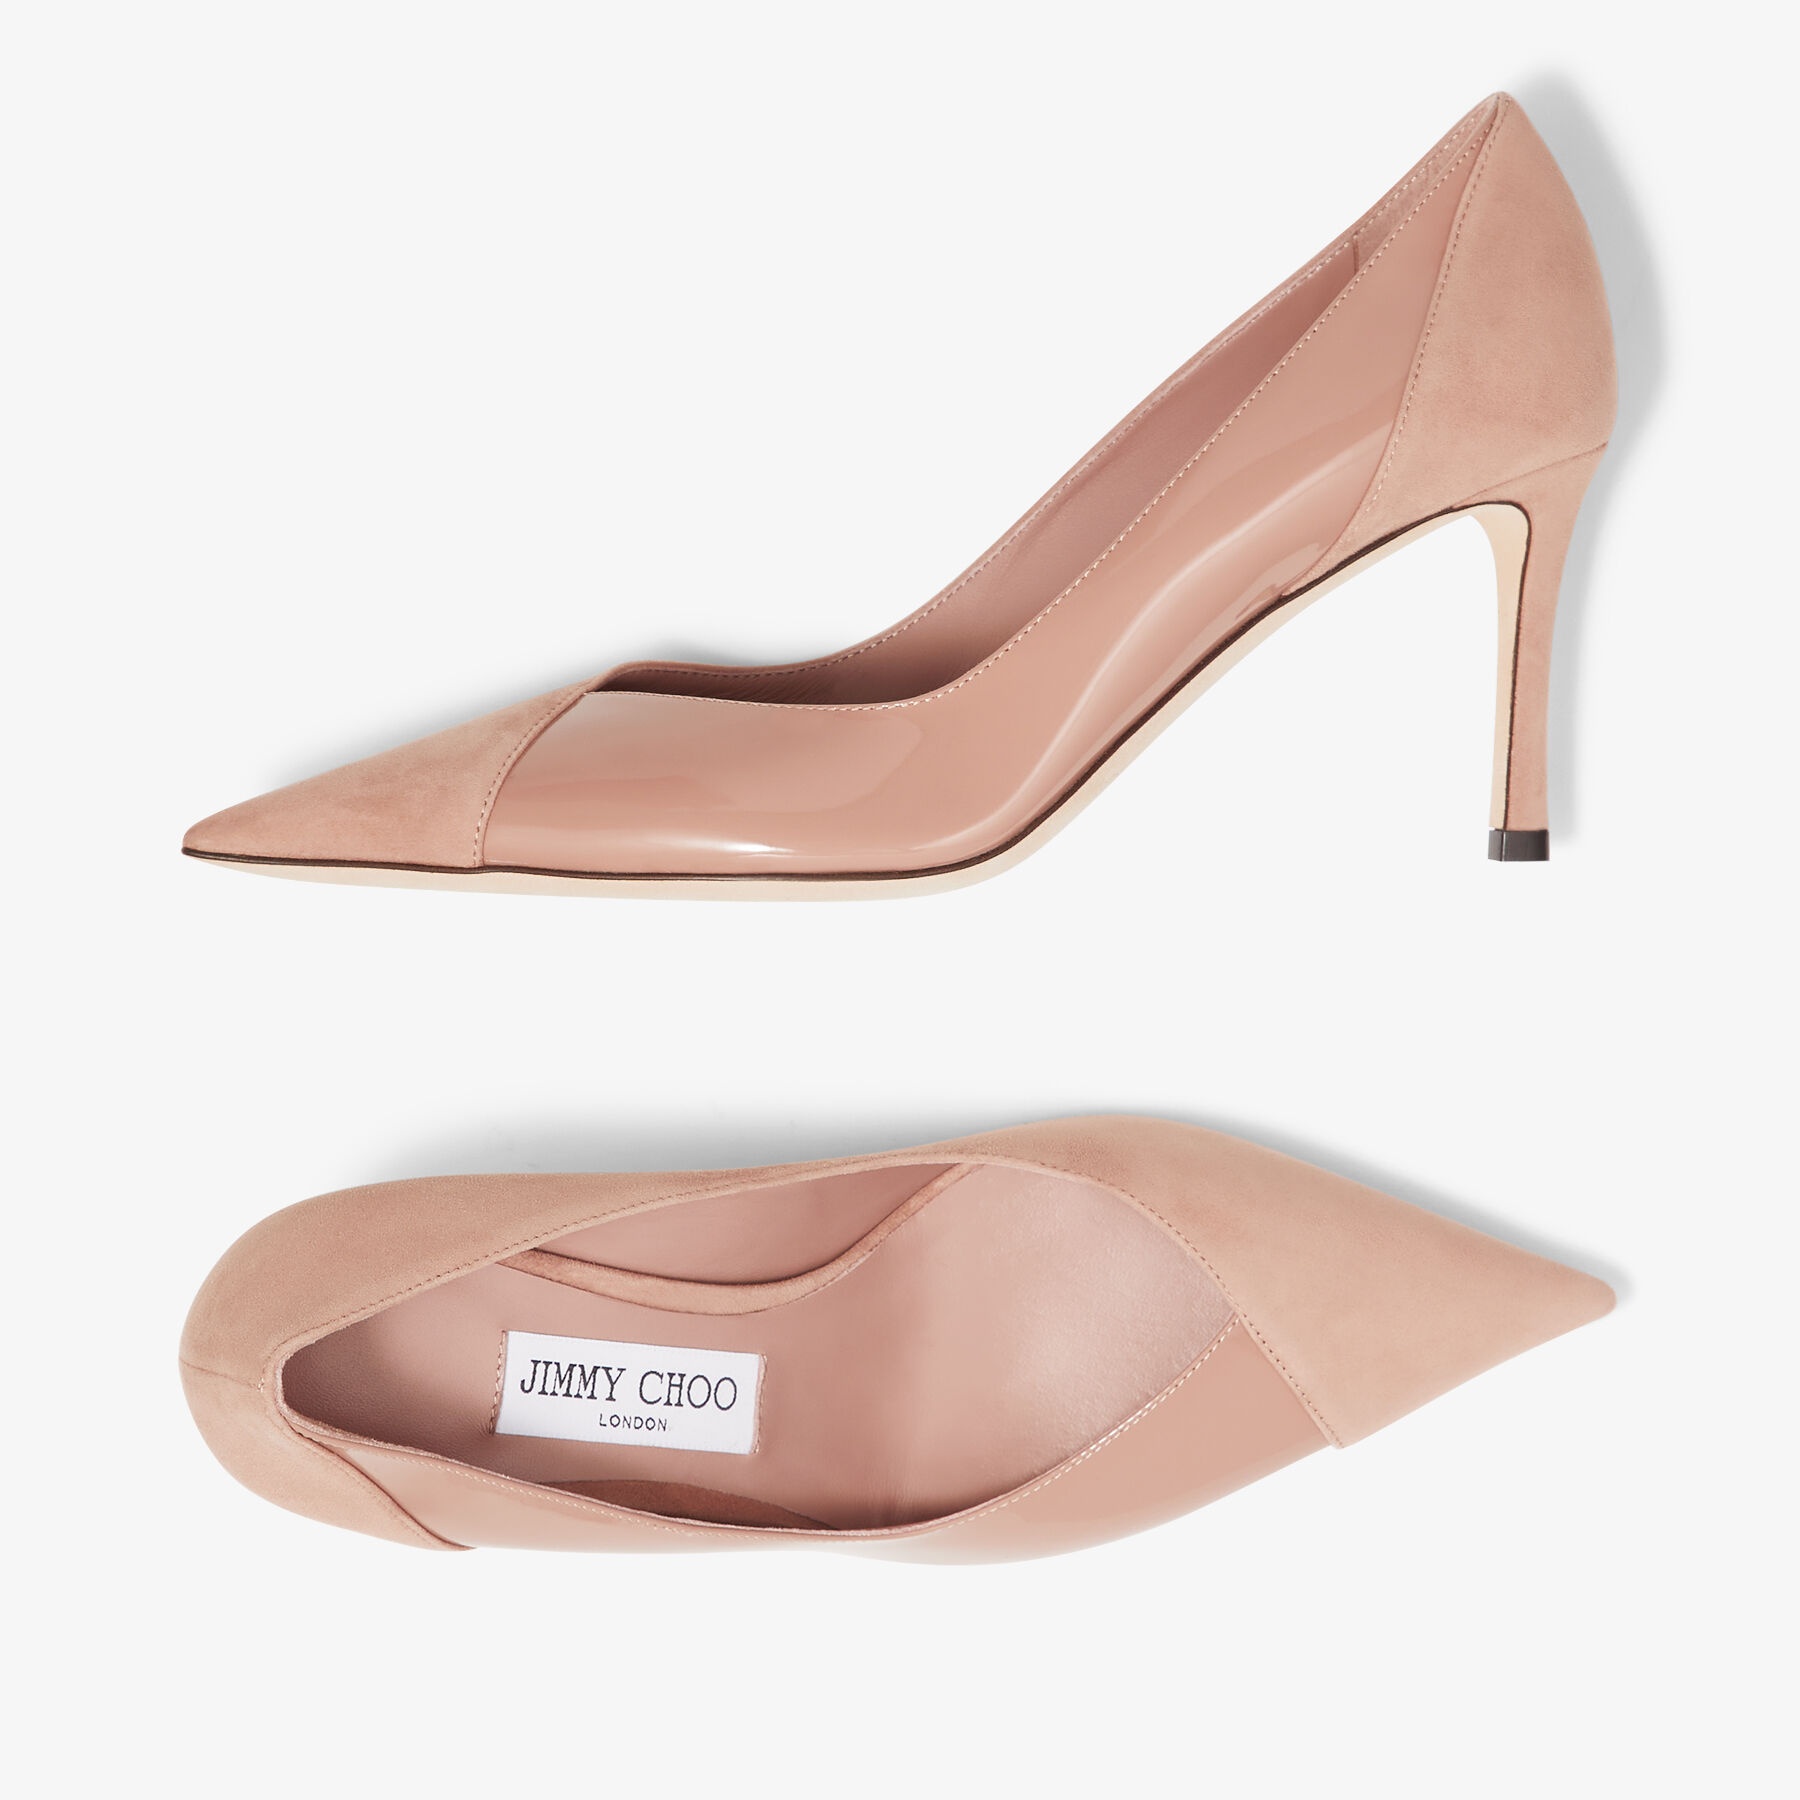 Cass 75
Ballet Pink Suede and Patent Pumps - 5